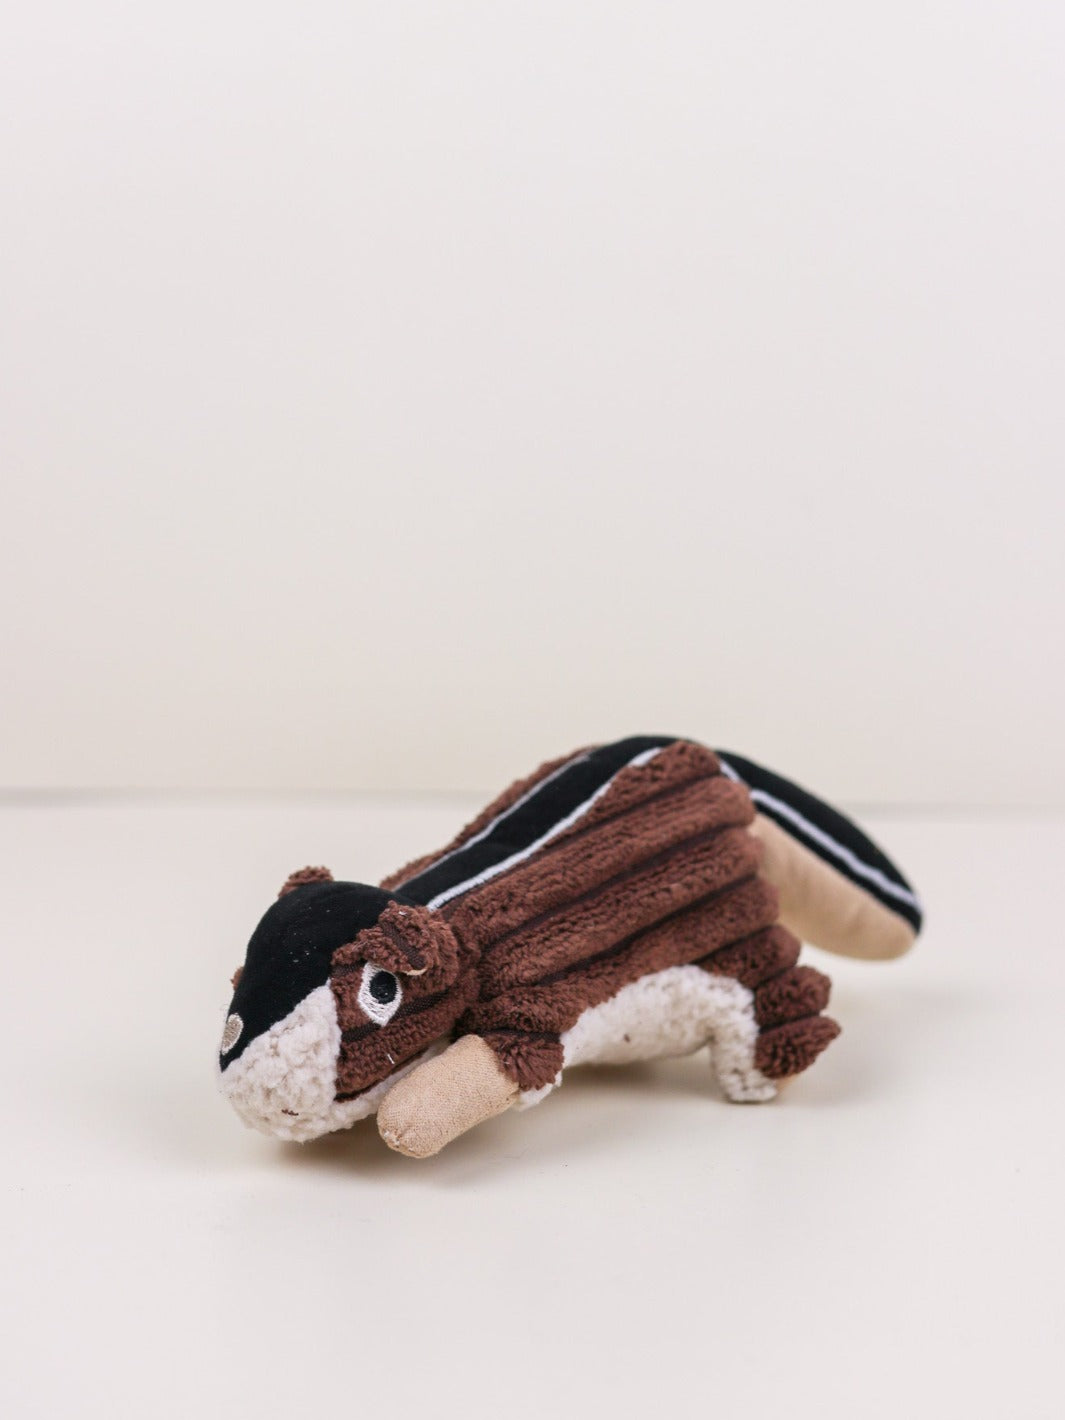 Chipmunk Plush Squeaker Toy by Tall Tails